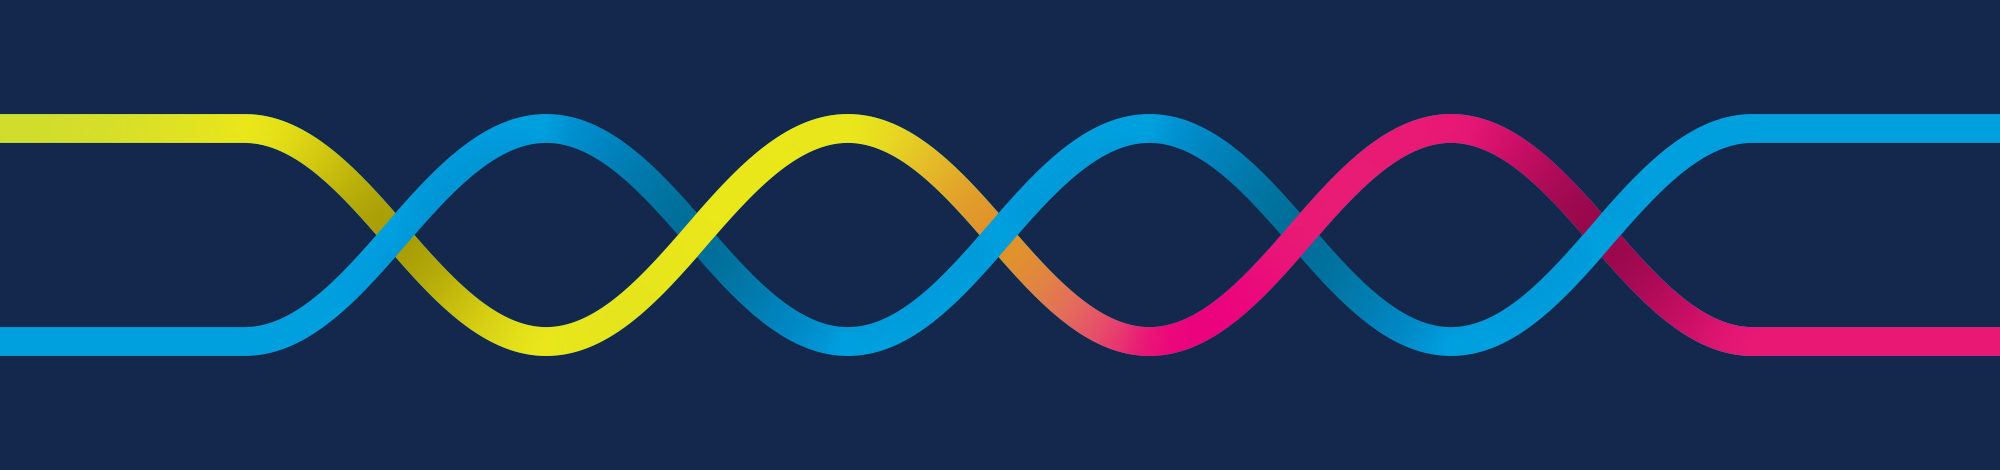 twisted colors that look like a double helix